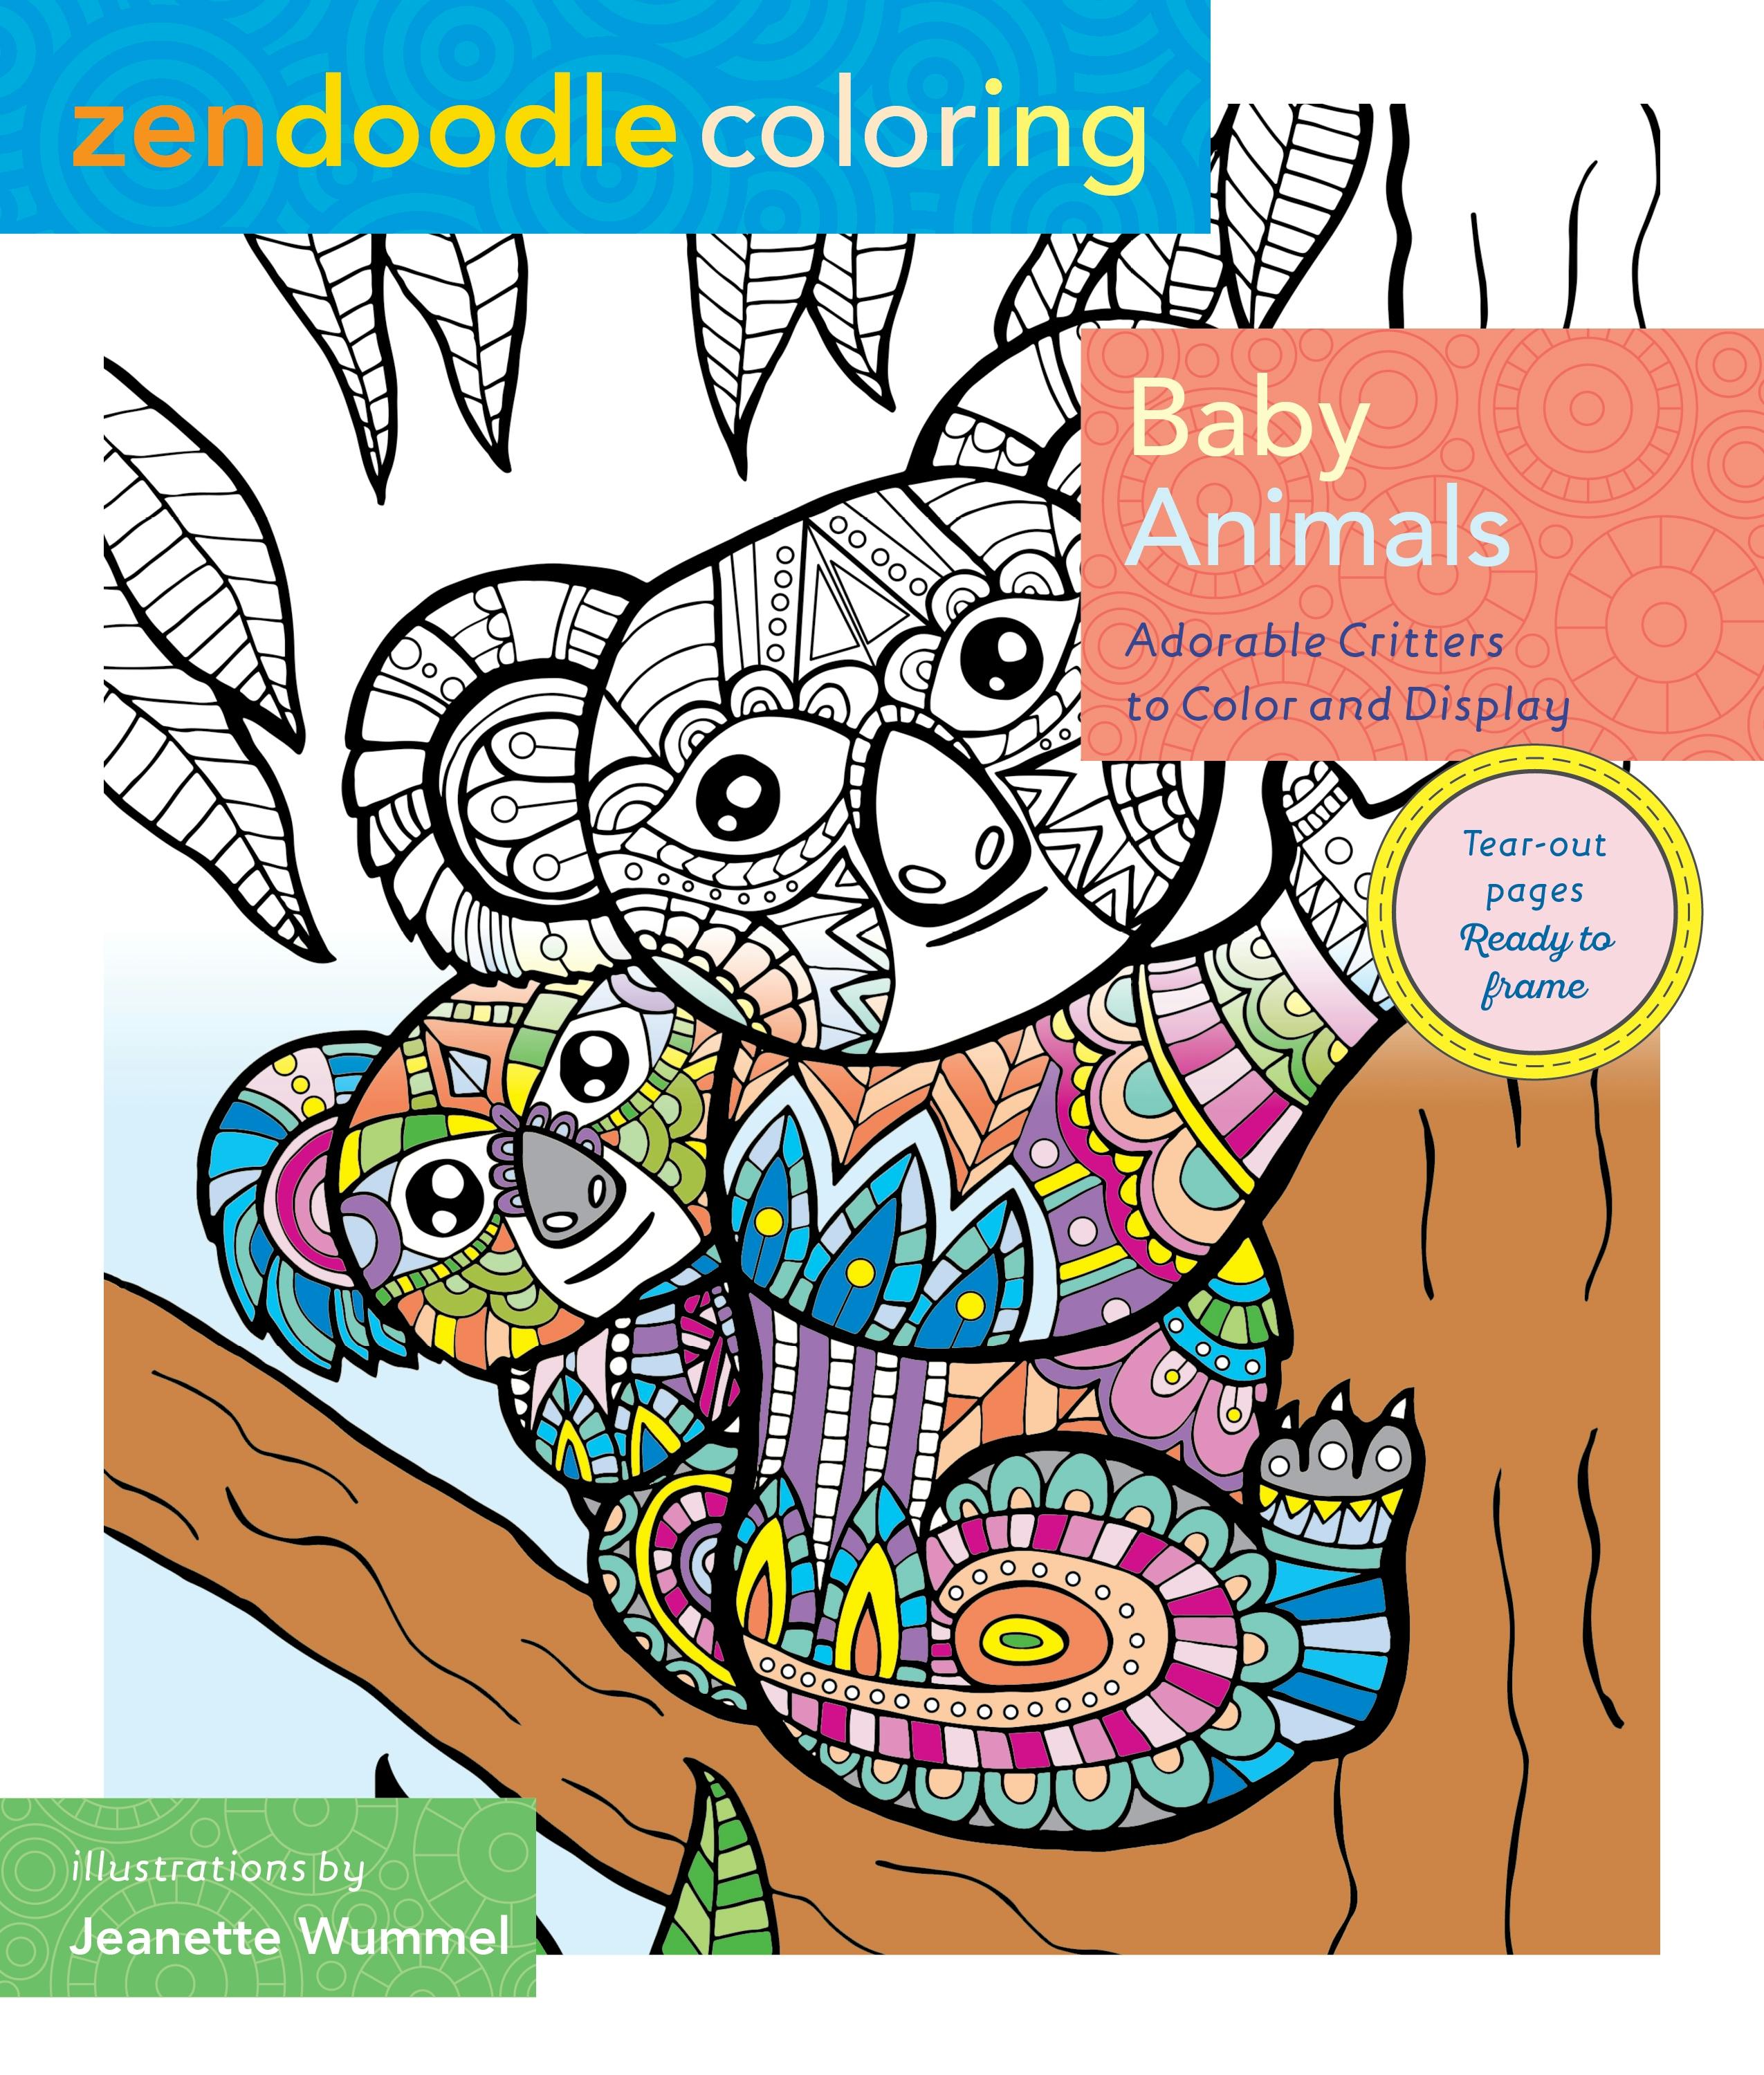 Image of Zendoodle Coloring: Baby Animals